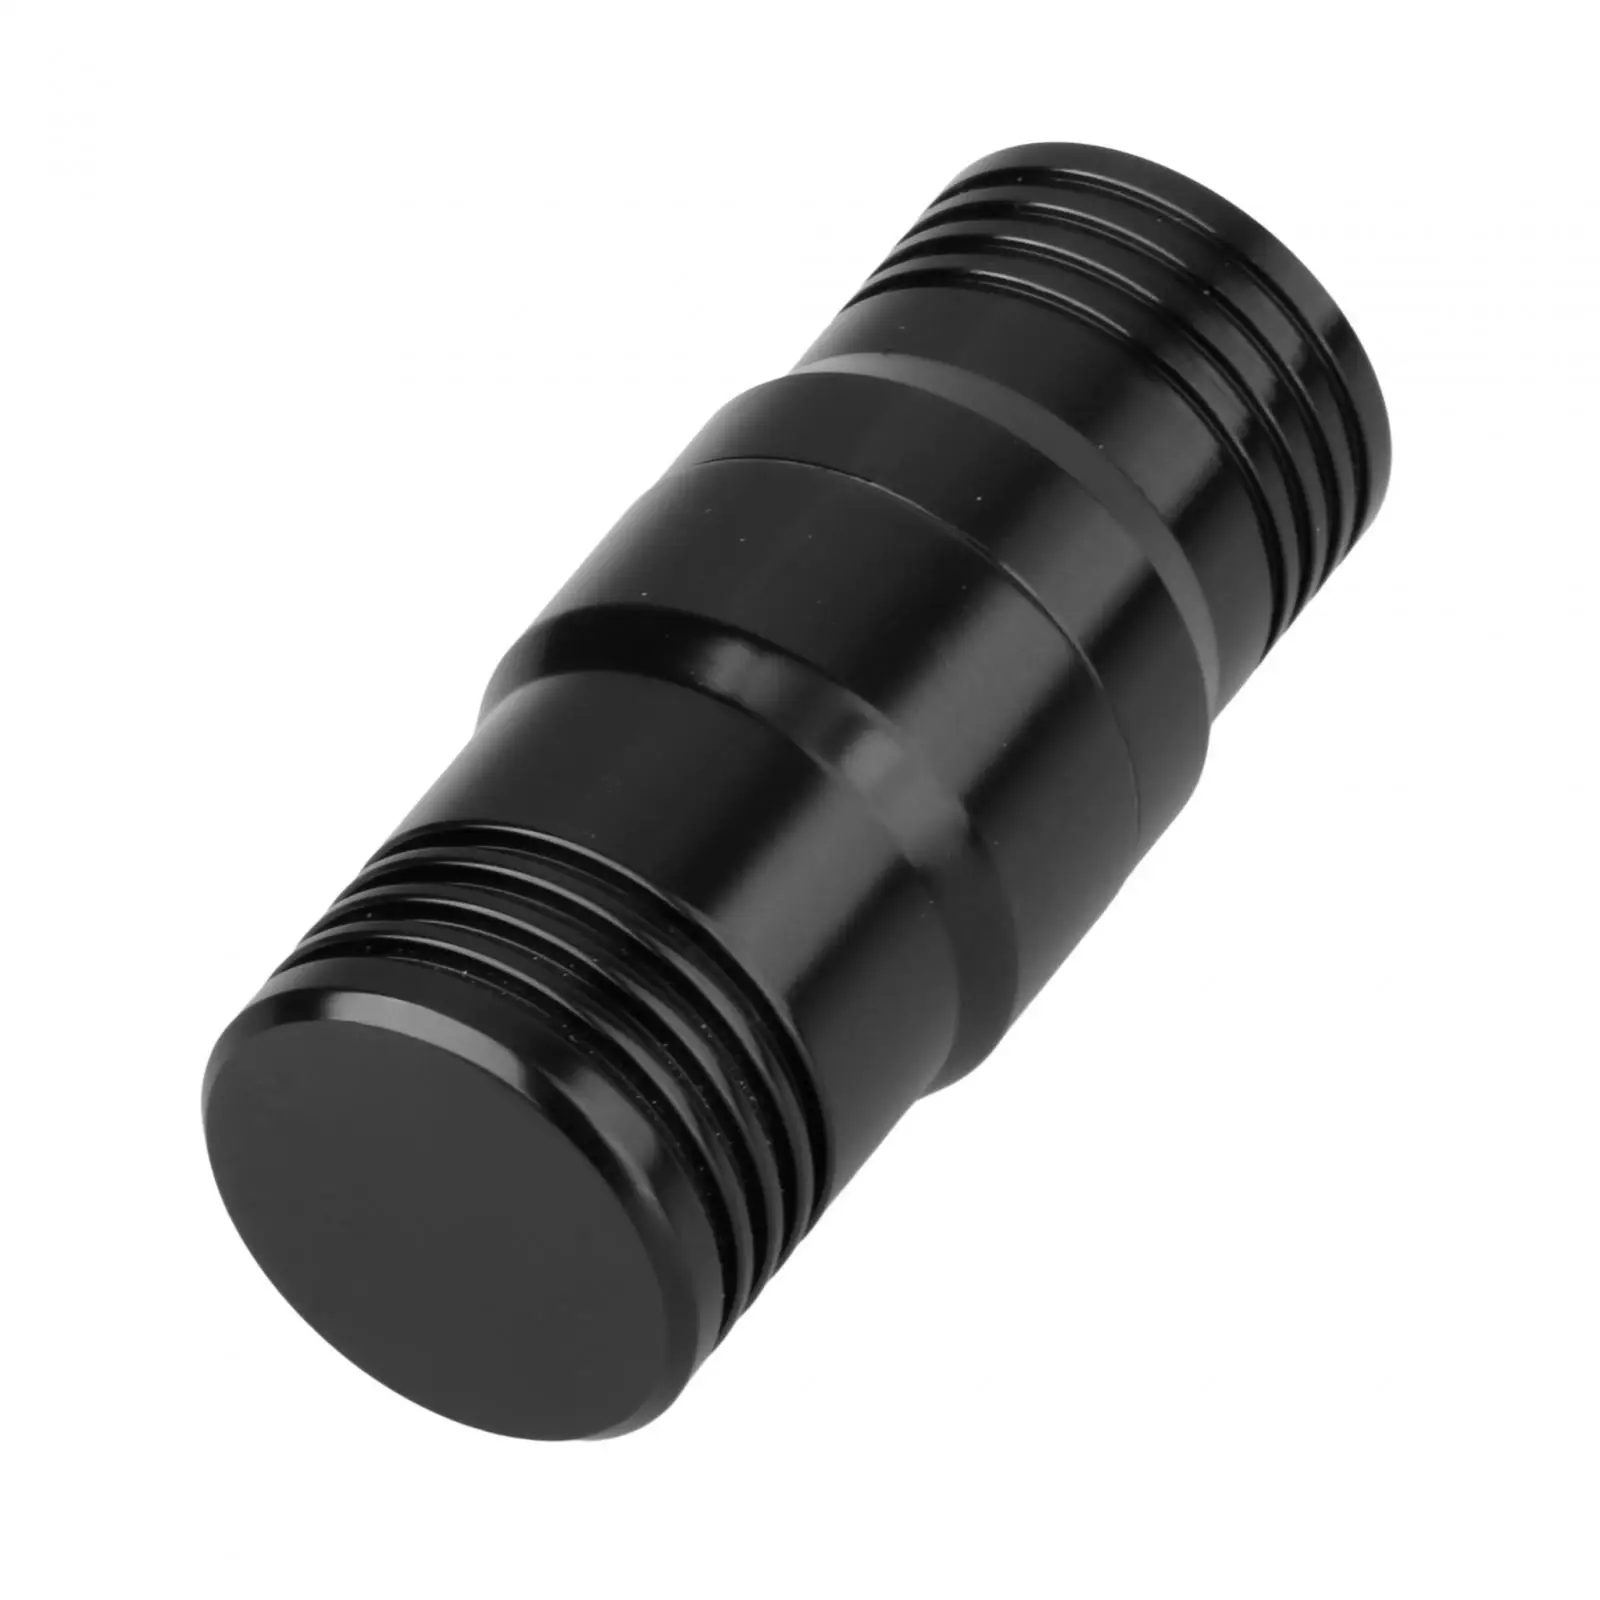 Joint Thread Protectors for Billiard Pool Cue , Joint Caps Protection Billiards